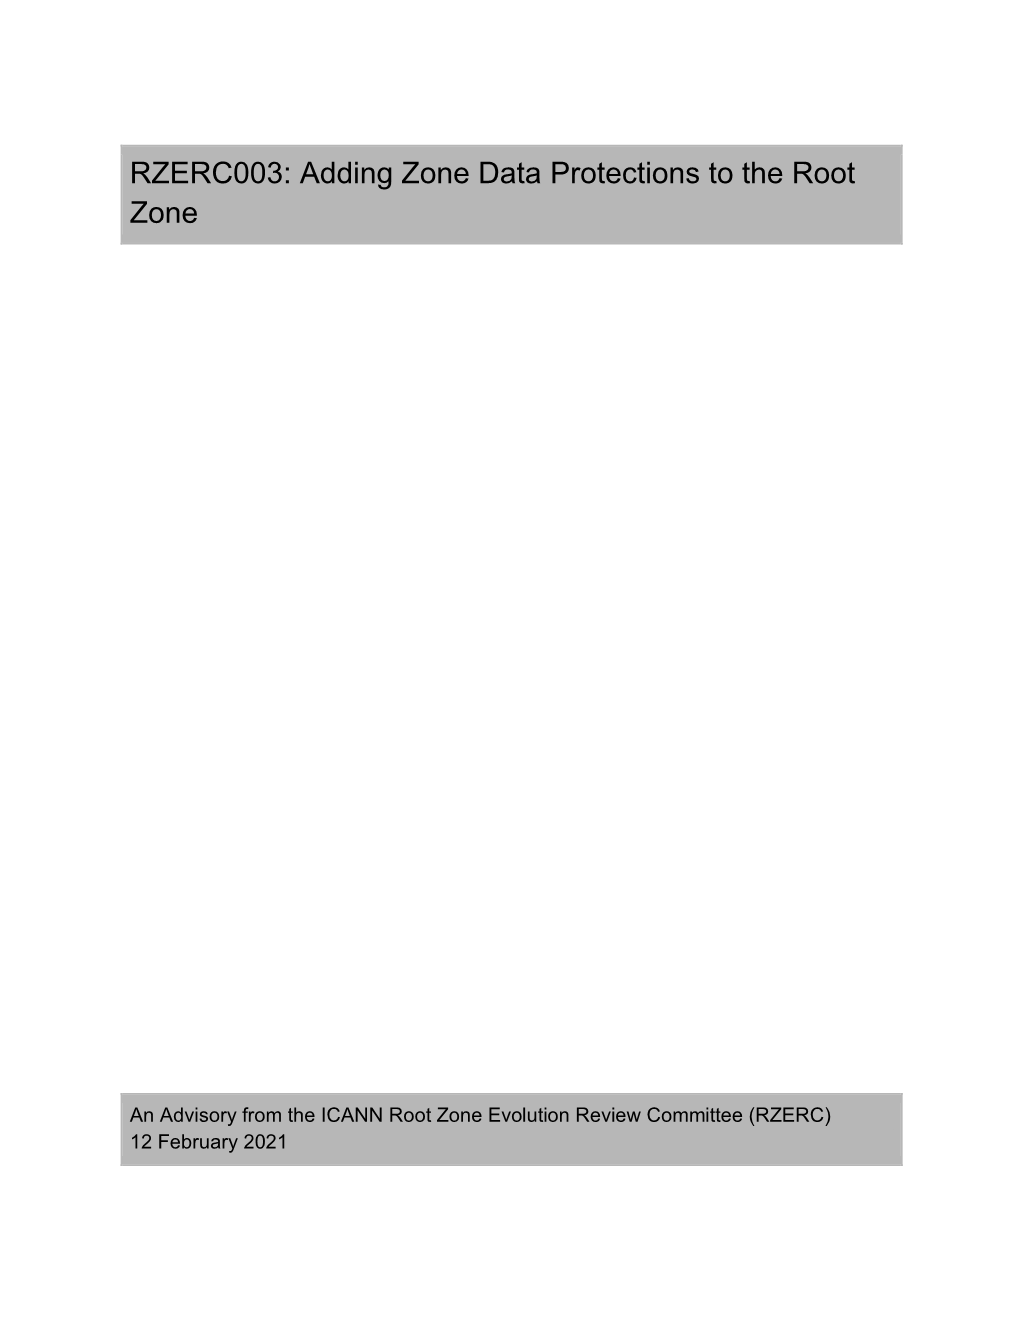 RZERC003: Adding Zone Data Protections to the Root Zone